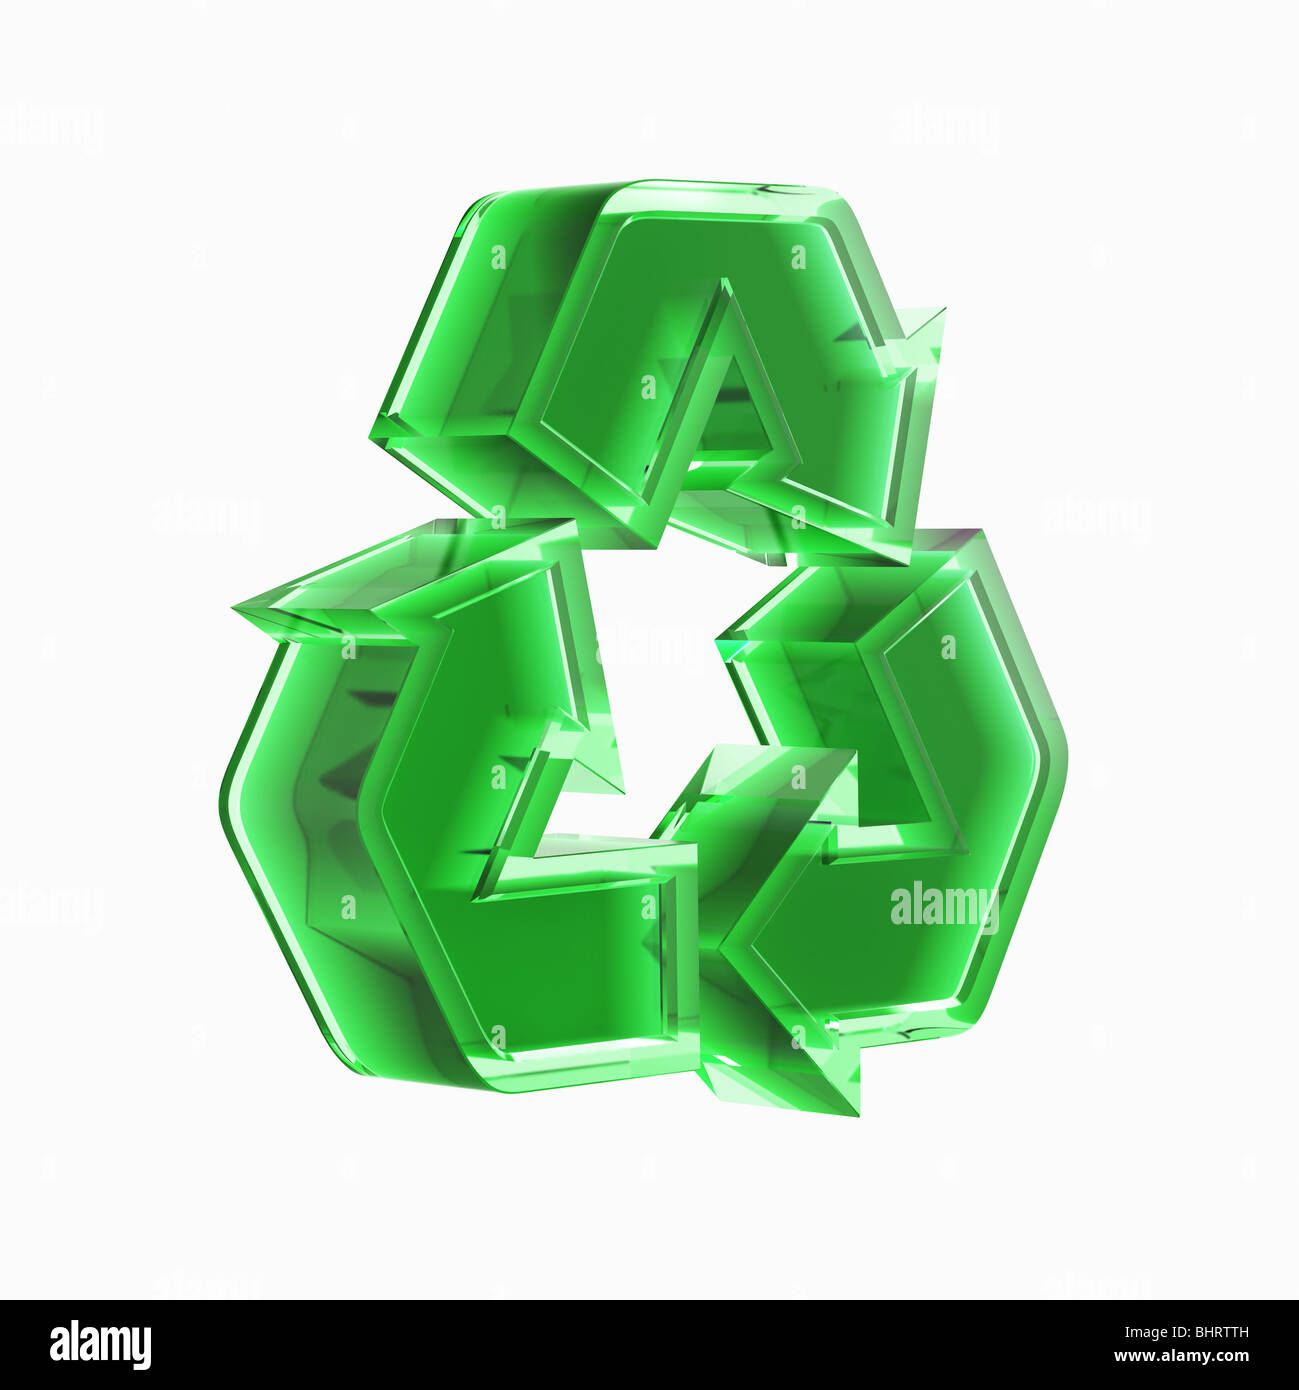 Green translucent recycling sign 3D illustration isolated on white background Stock Photo